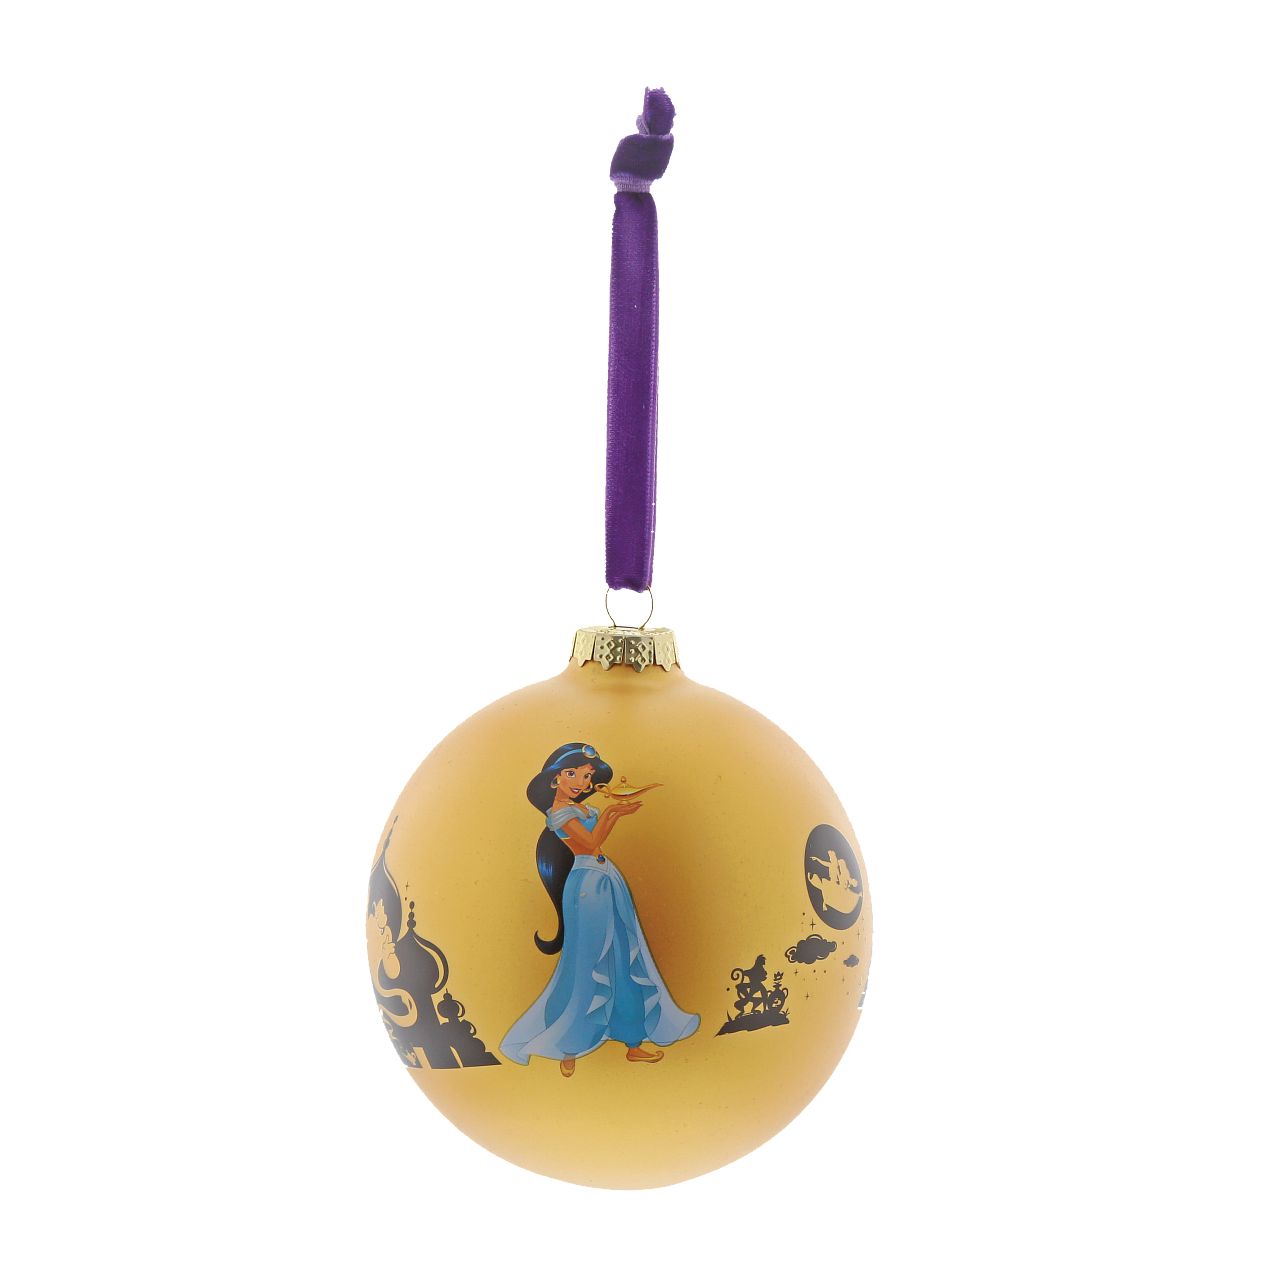 Disney Christmas Bauble Aladdin It's All So Magical  Jasmine from Disney's Aladdin can be found alongside Genie, Abu and the magic carpet in this beautiful glass bauble. This treasured keepsake would make a lovely unique gift for a friend, or a self-purchase to brighten up the home. Pre